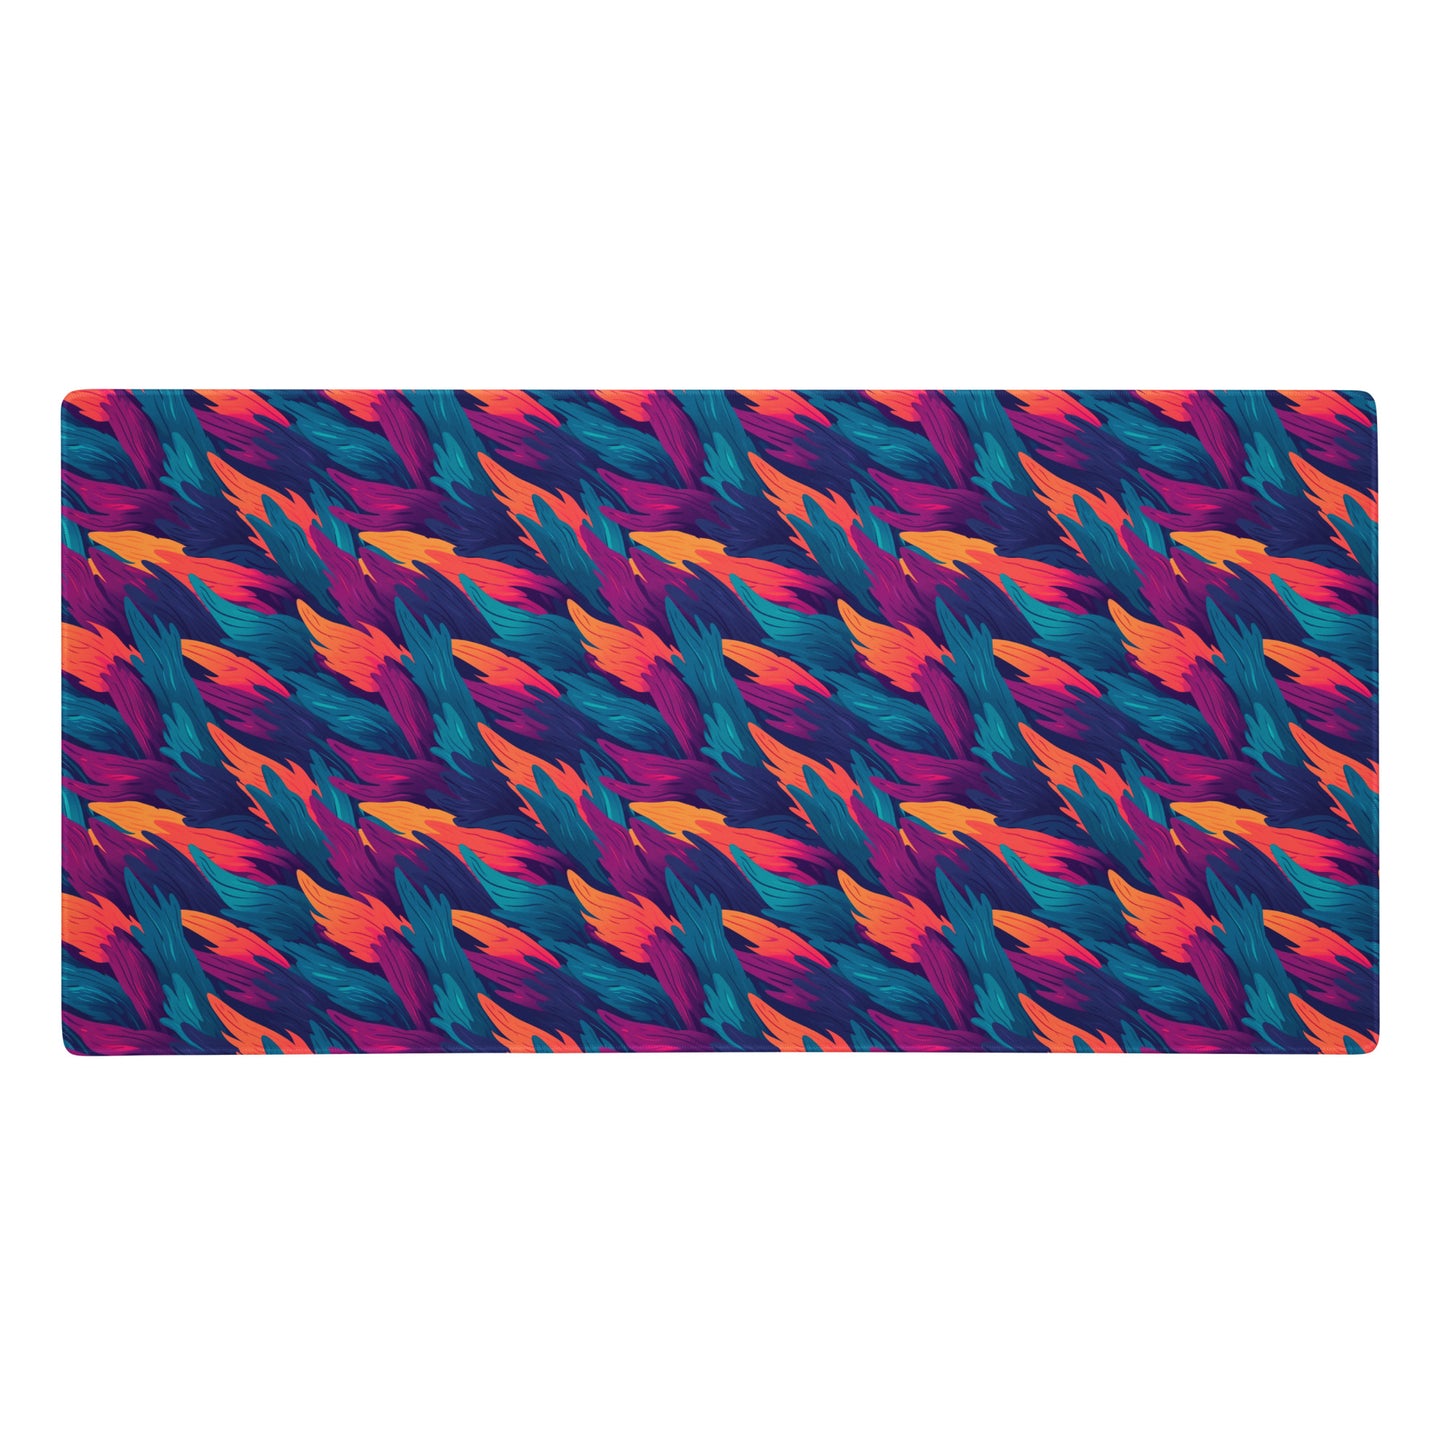 A 36" x 18" desk pad with a wavy flame pattern on it. Blue, Orange and Purple in color.